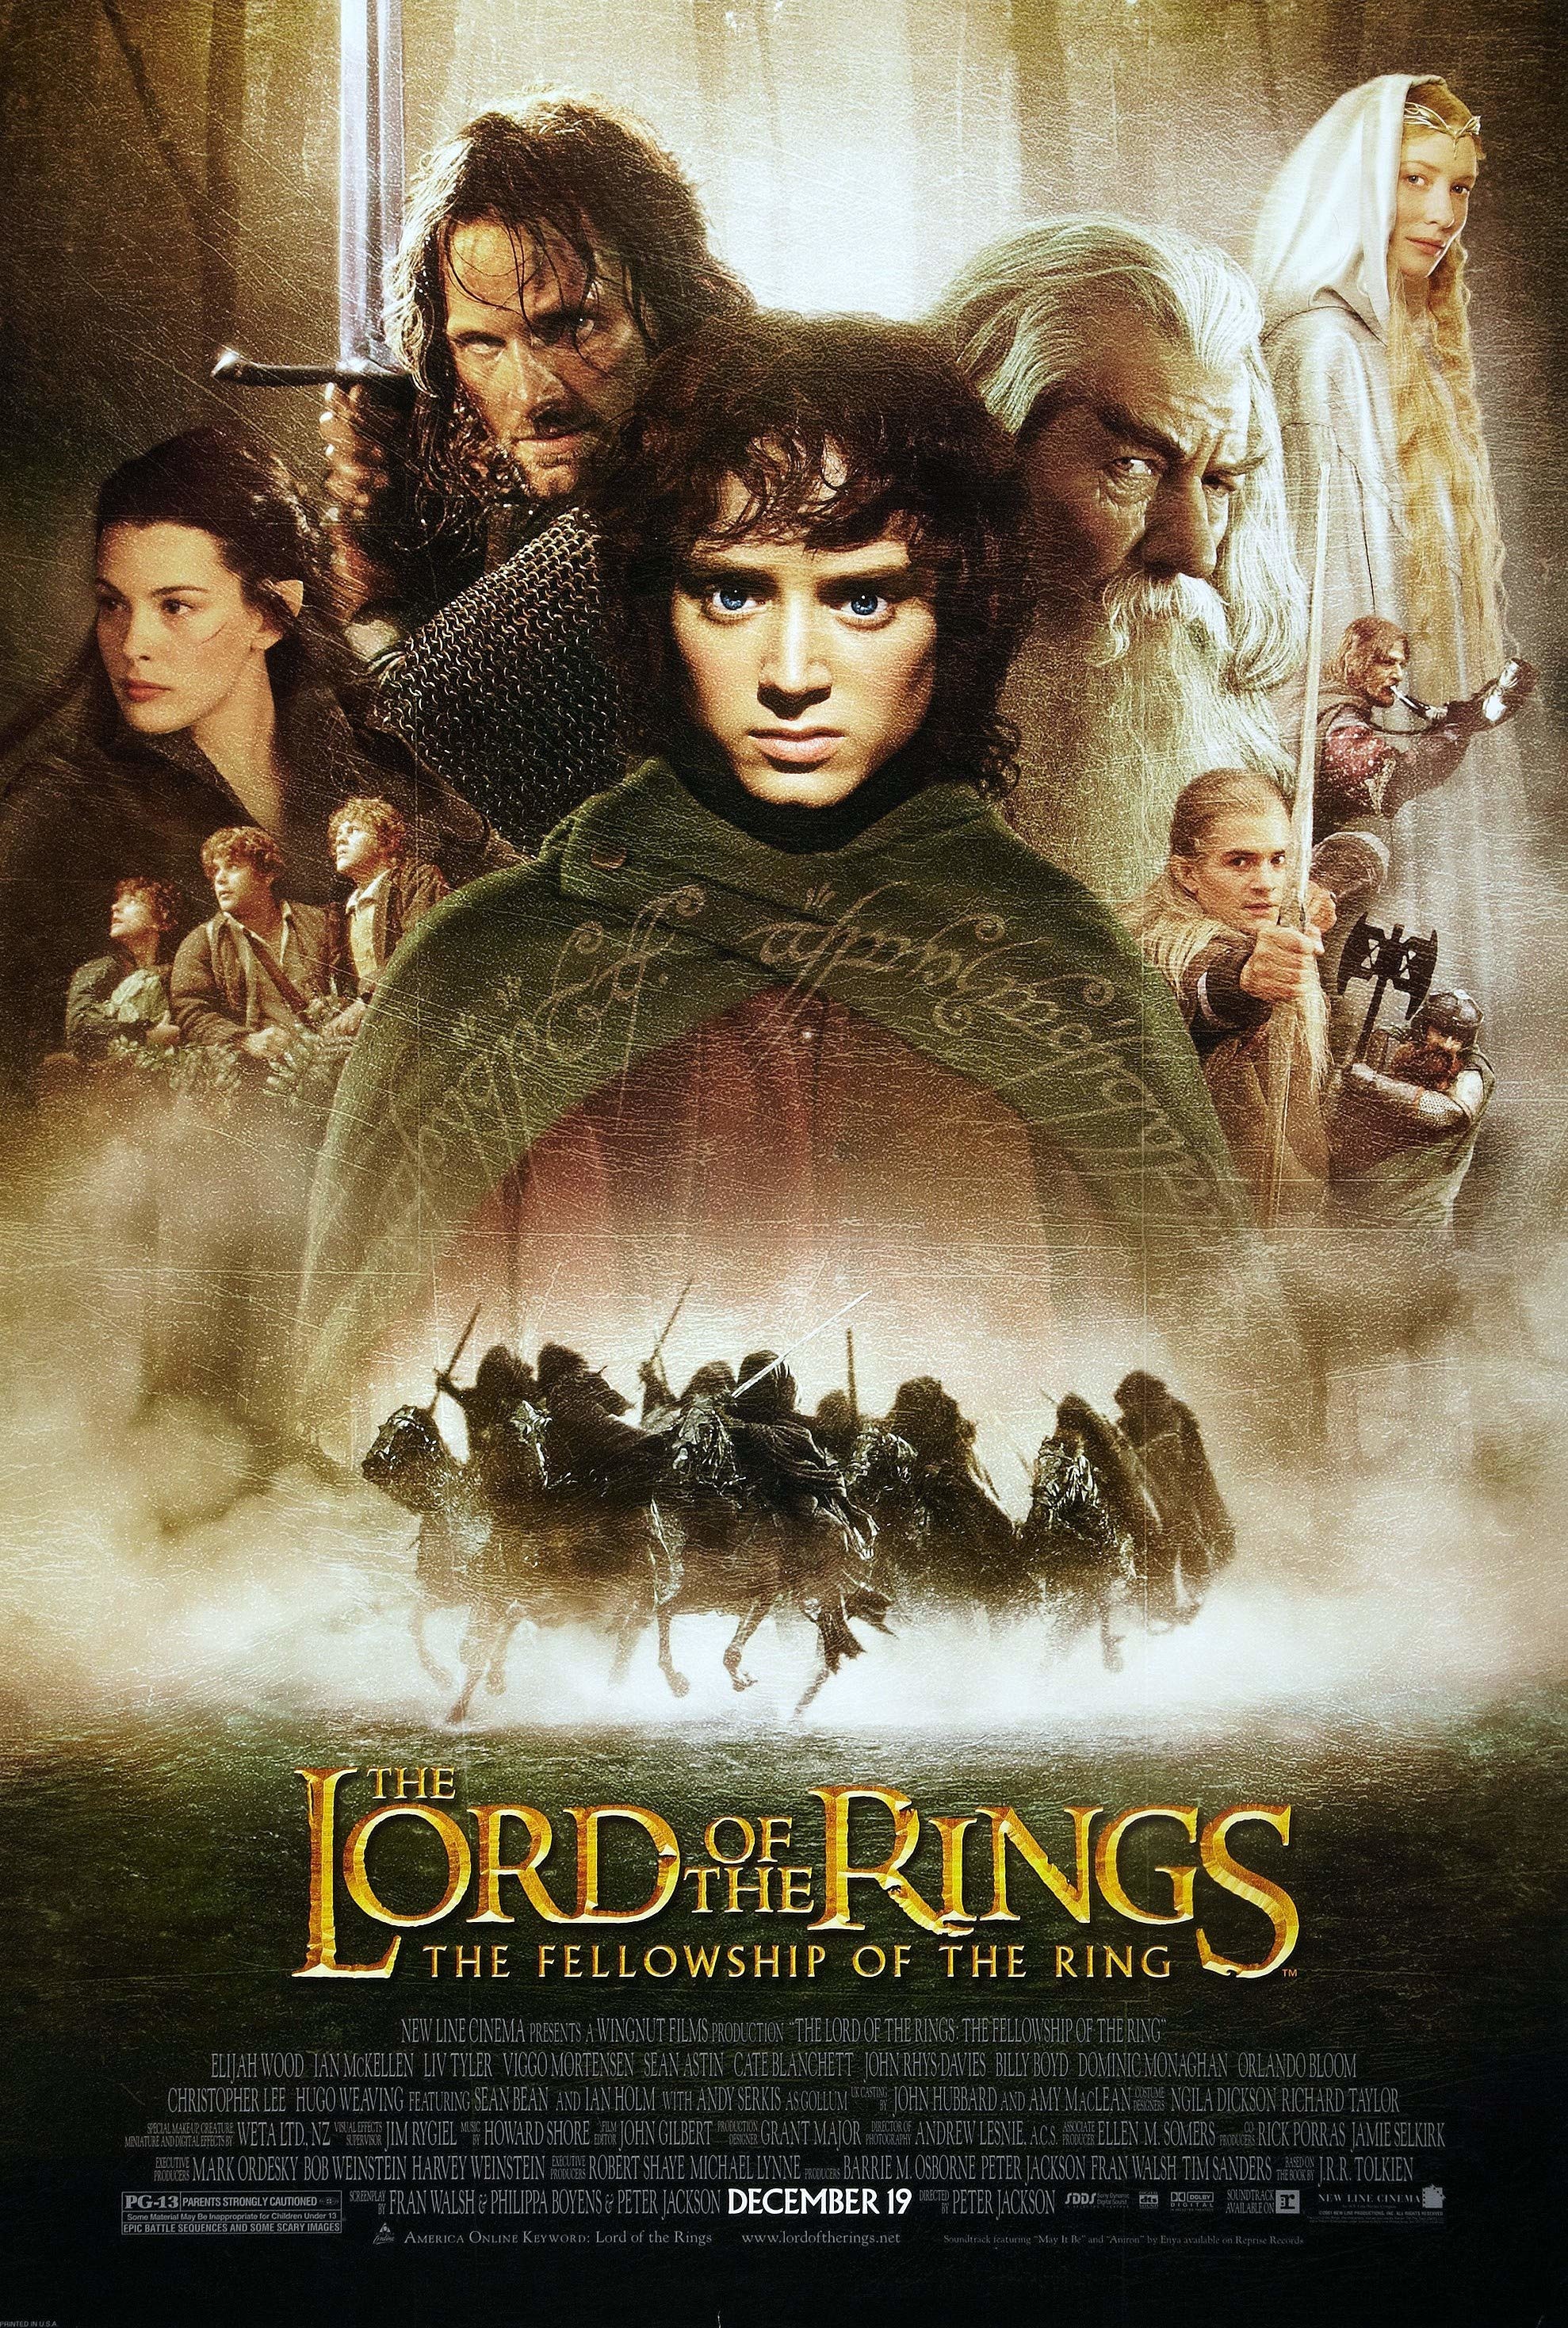 The Lord of the Rings: The Motion Picture Trilogy Blu-ray (Theatrical  Editions | The Fellowship of the Ring / The Two Towers / The Return of the  King)